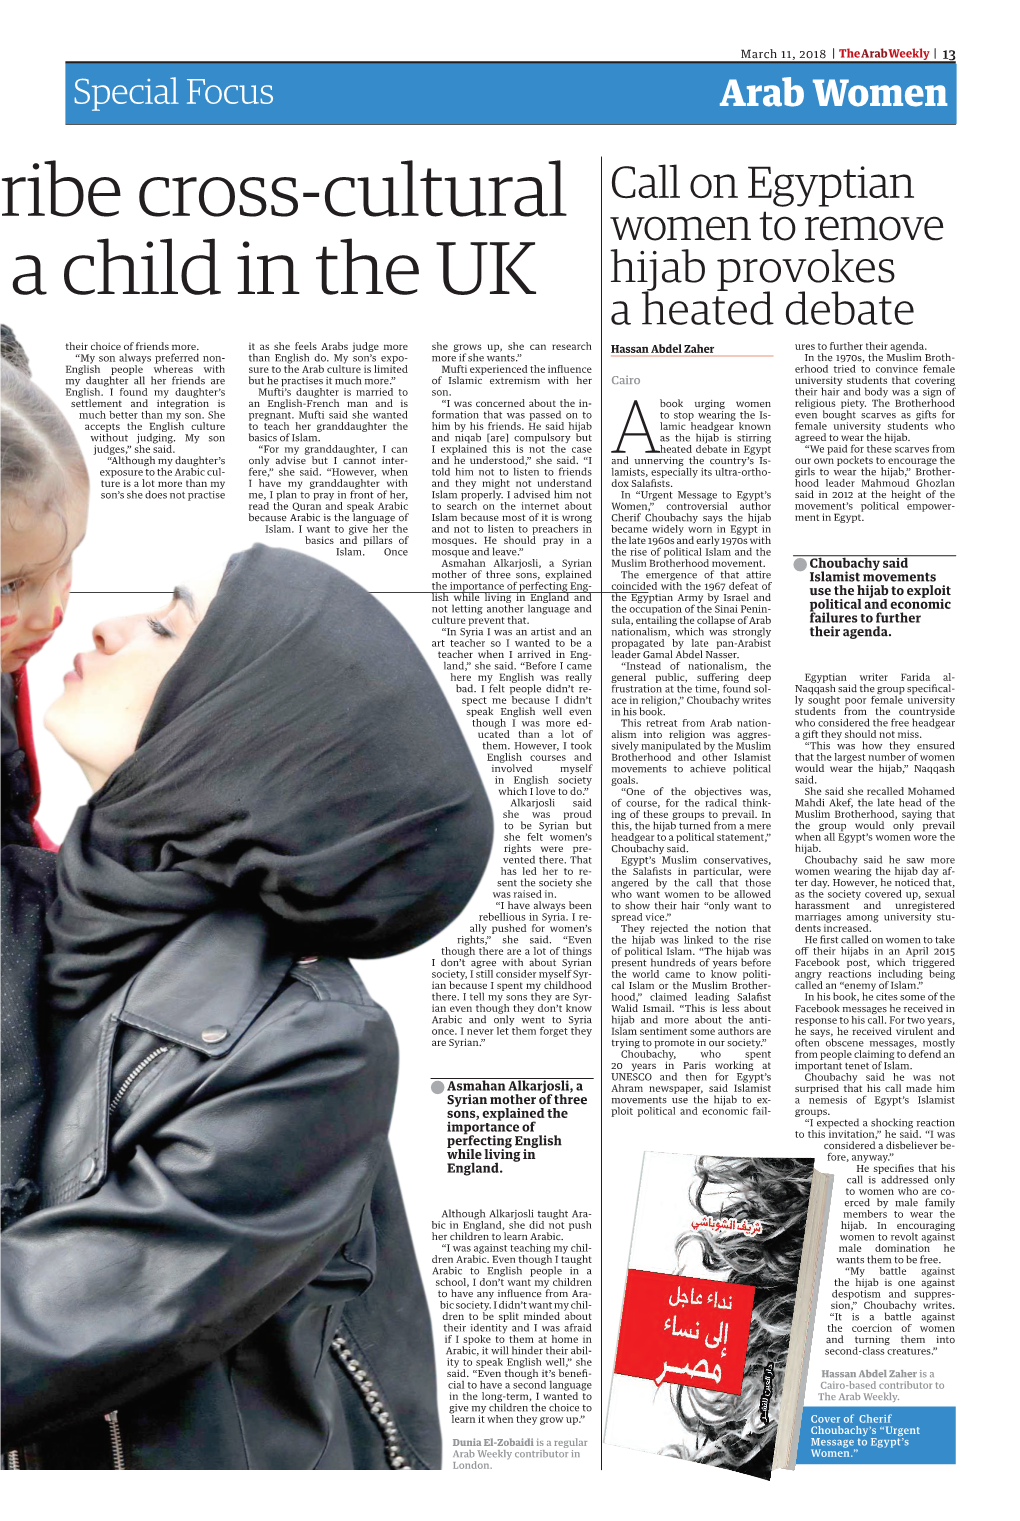 Others Describe Cross-Cultural Nce Raising a Child in the UK